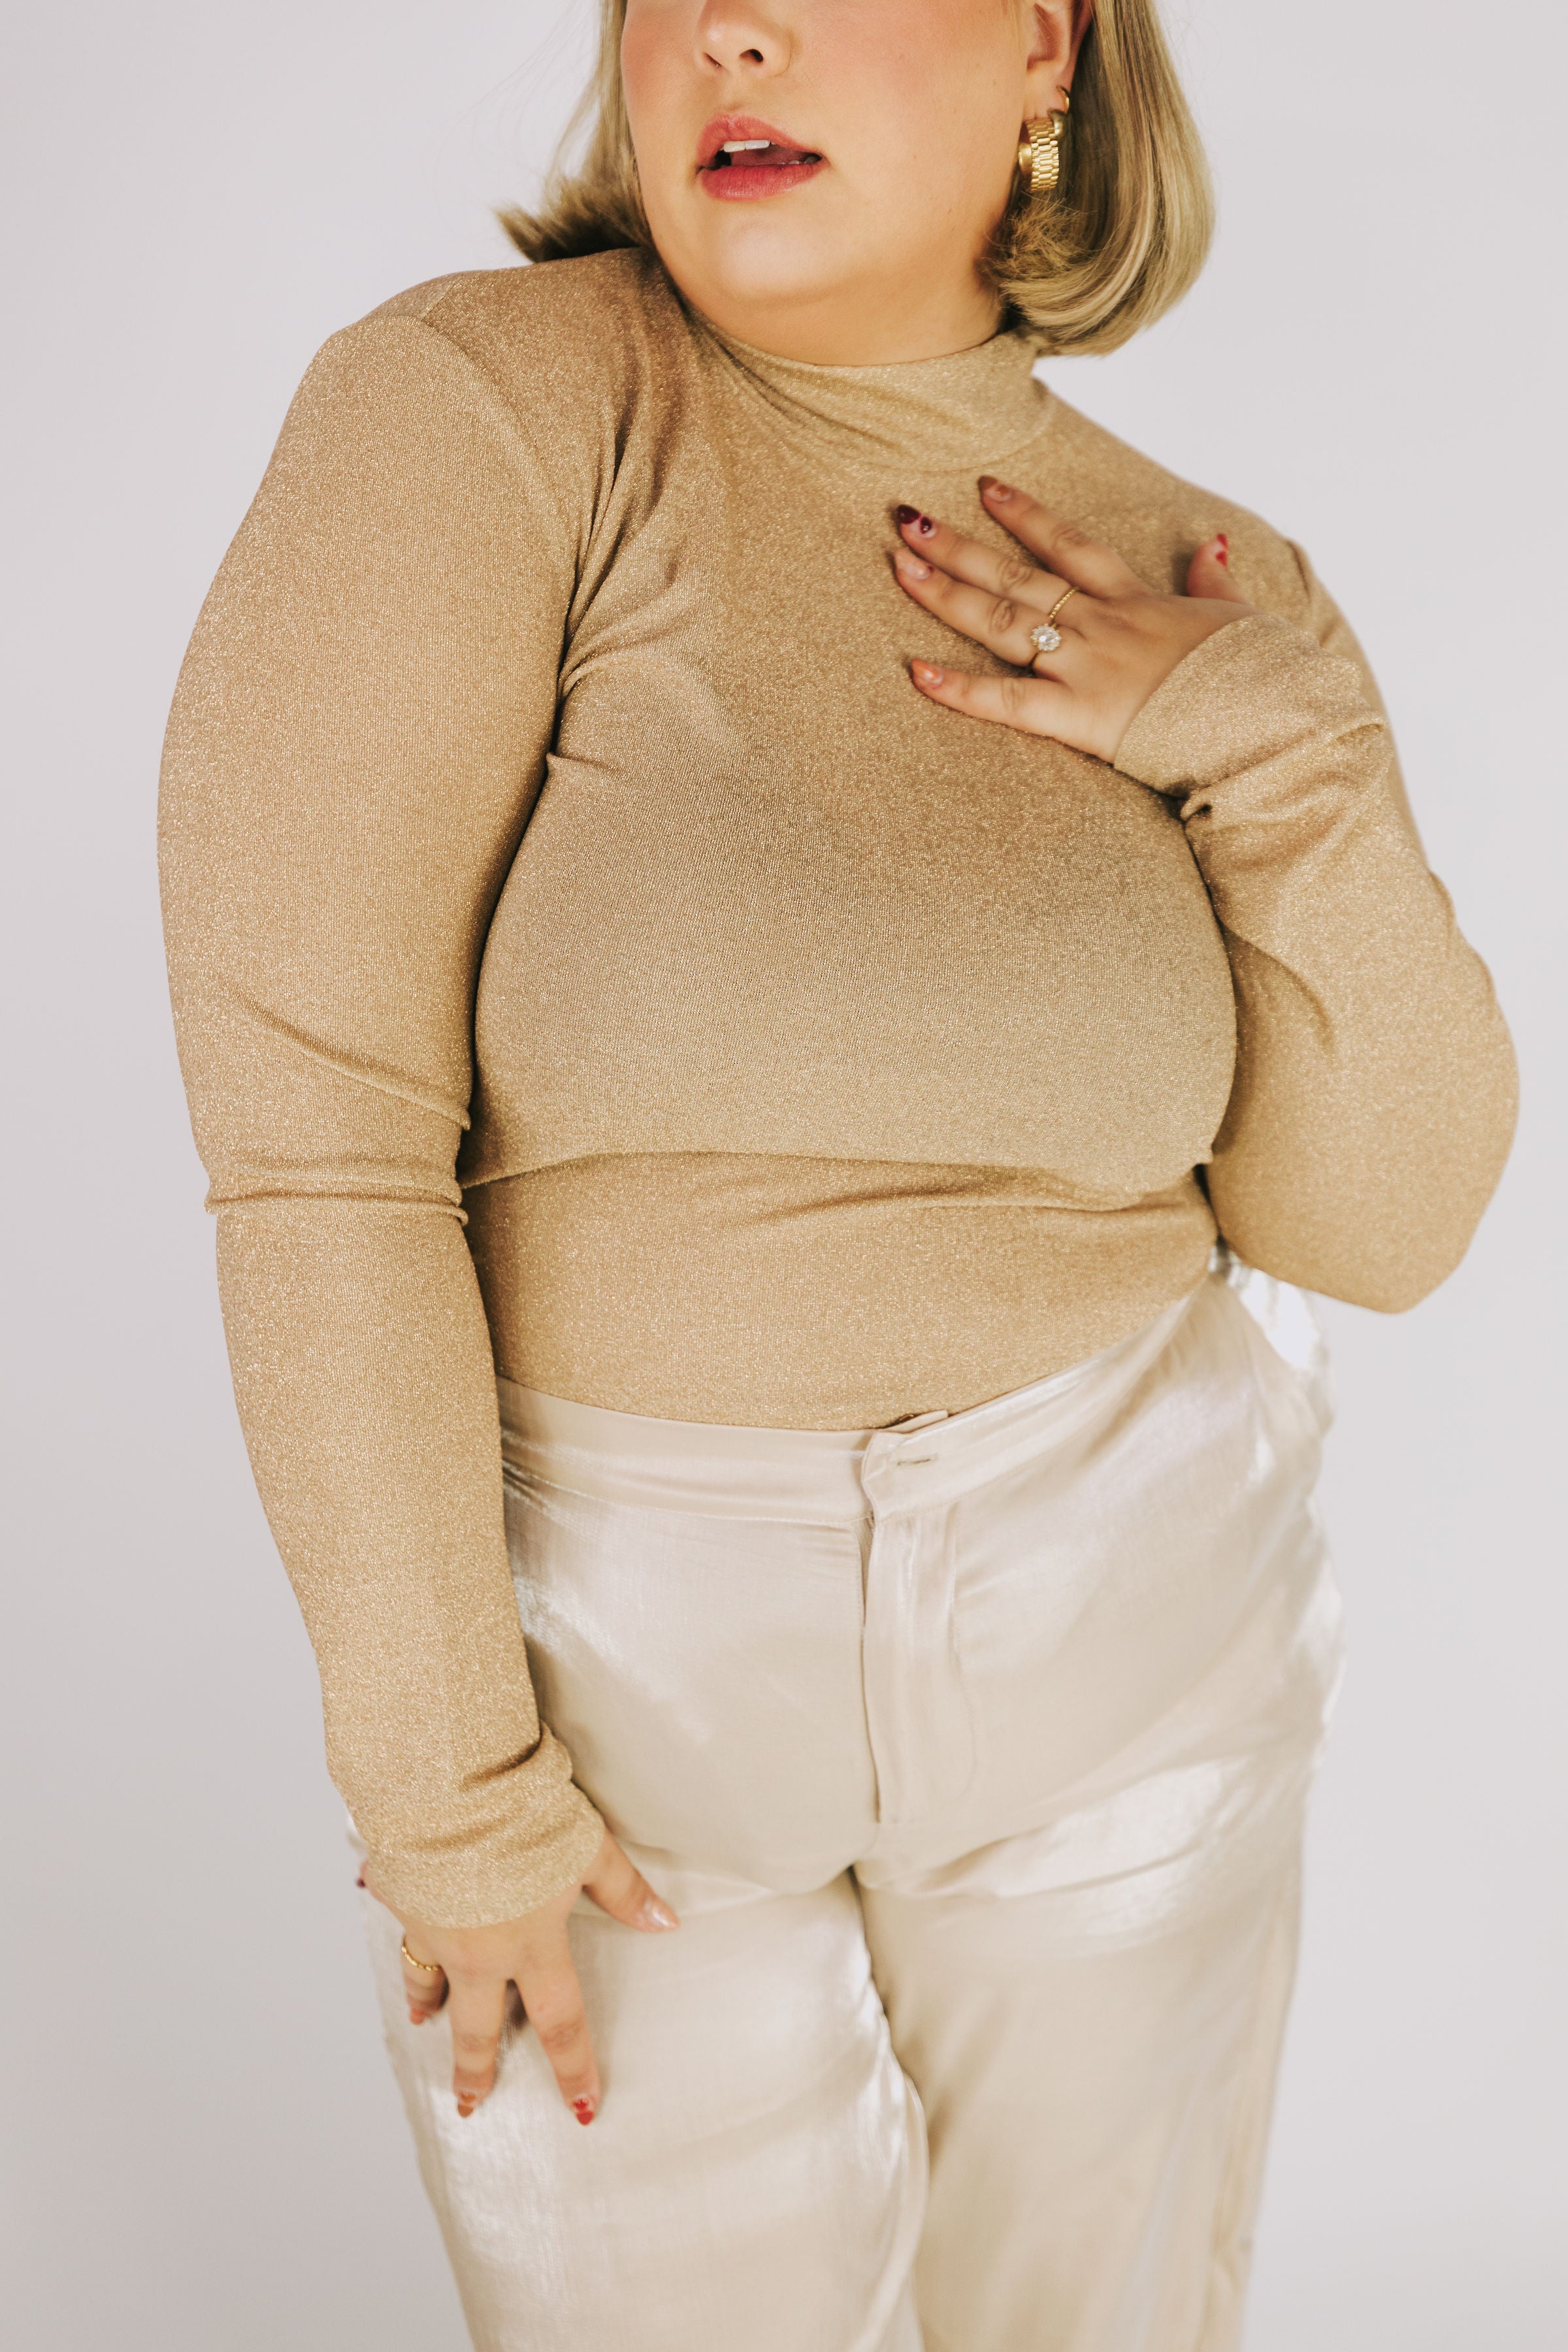 PLUS SIZE - See You There Bodysuit